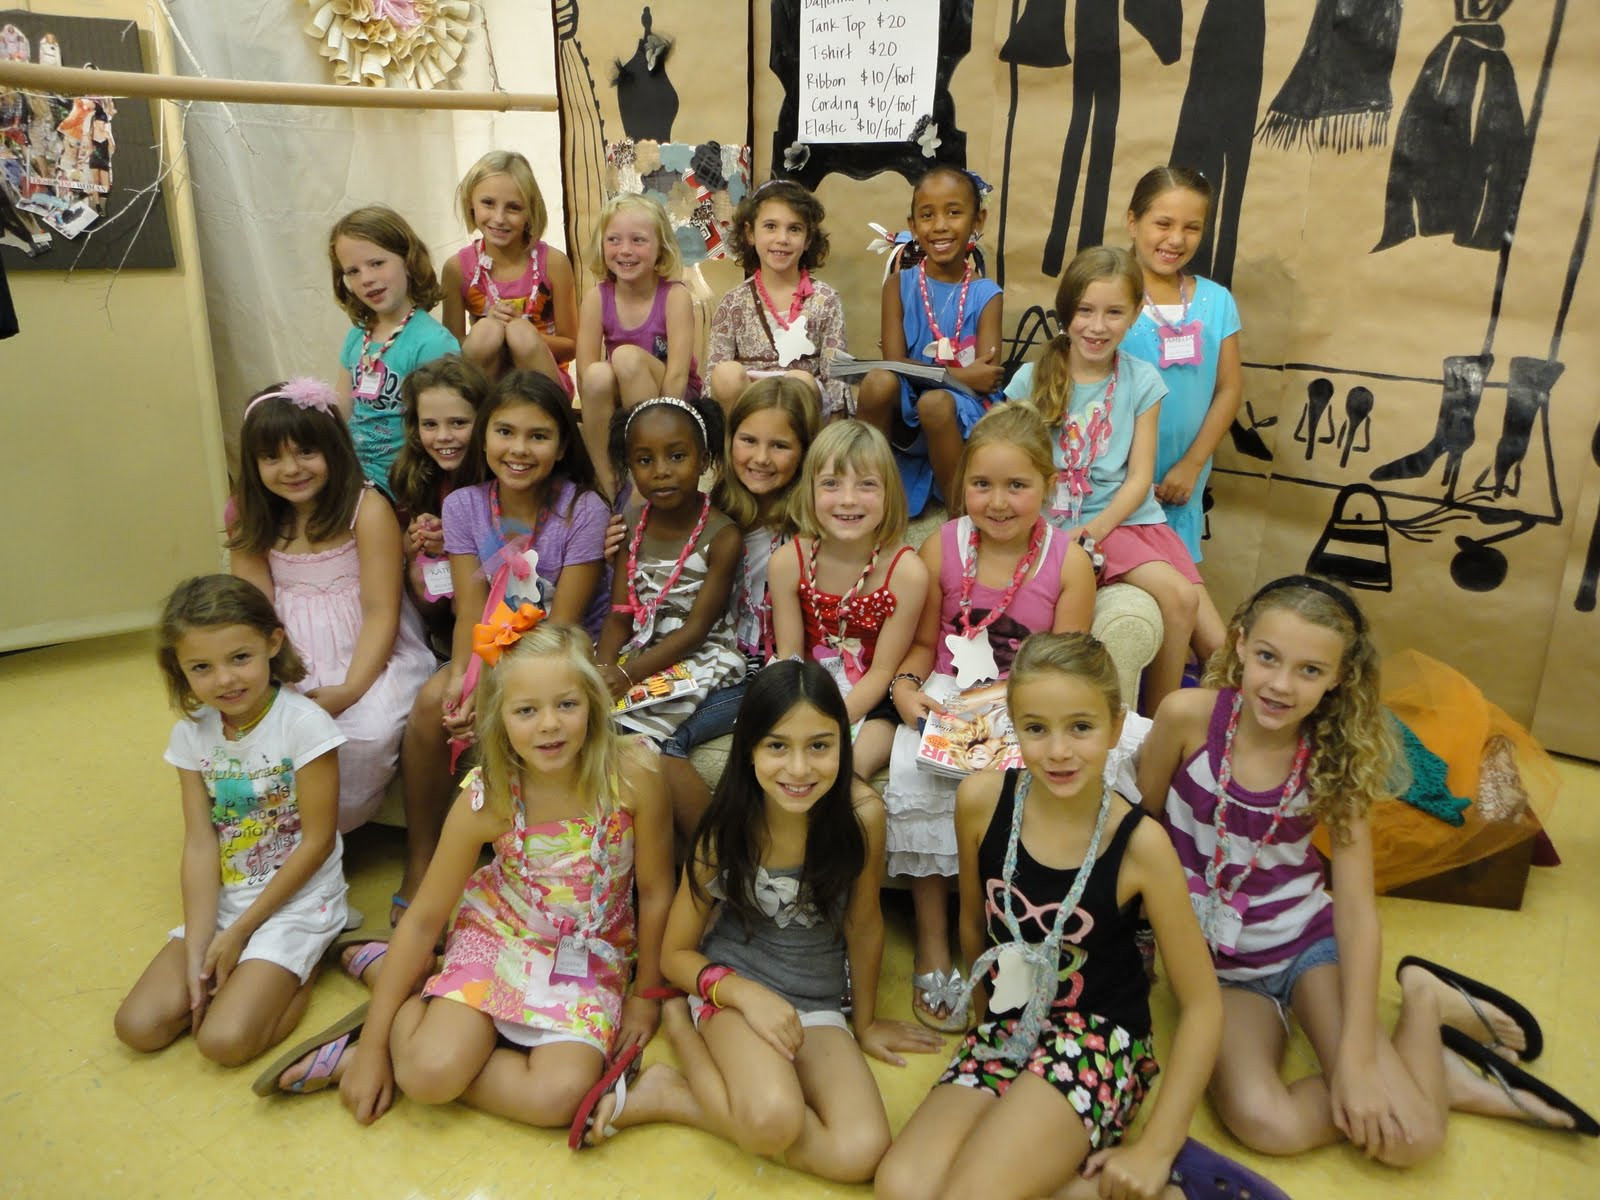 Fashion Designing Camps For Kids
 Davidson Art Camp FASHION DESIGN CAMPS Your Invited to